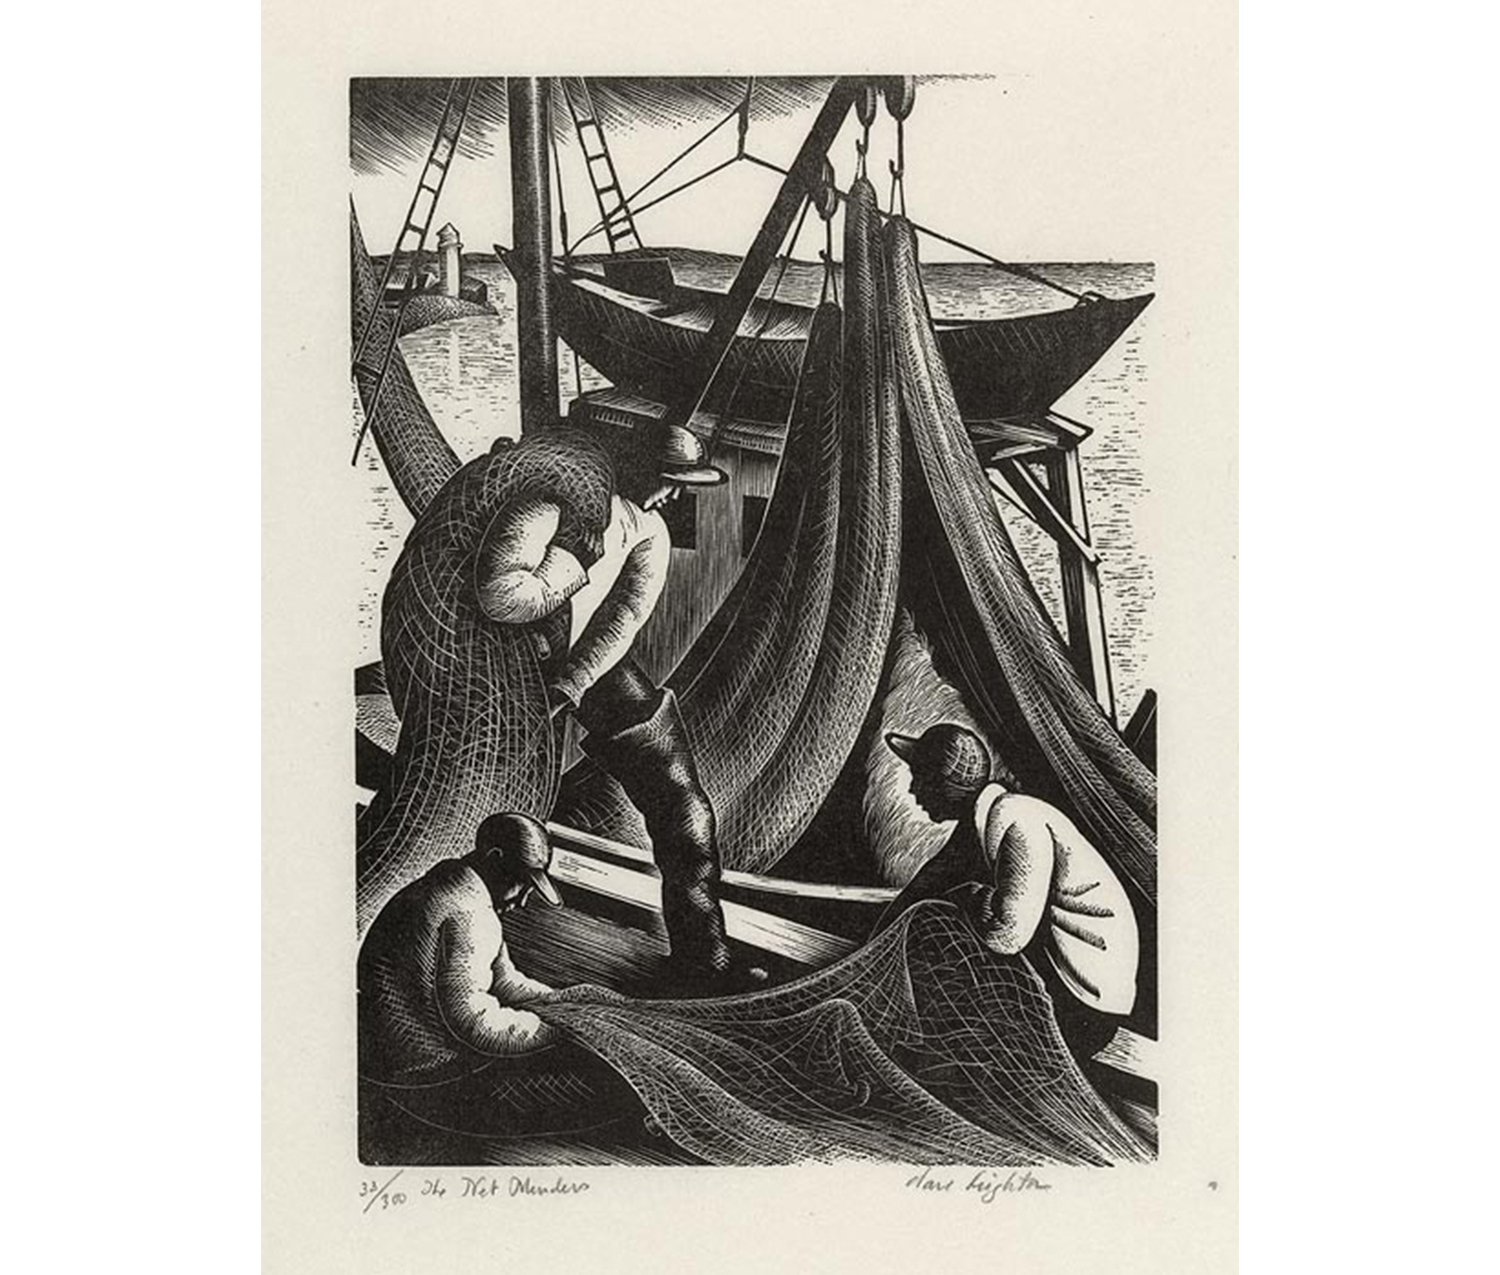 two men seated mending a net while a third wearing tall boots carries another net over his shoulder, docked boat near them at edge of water and lighthouse in back left distance